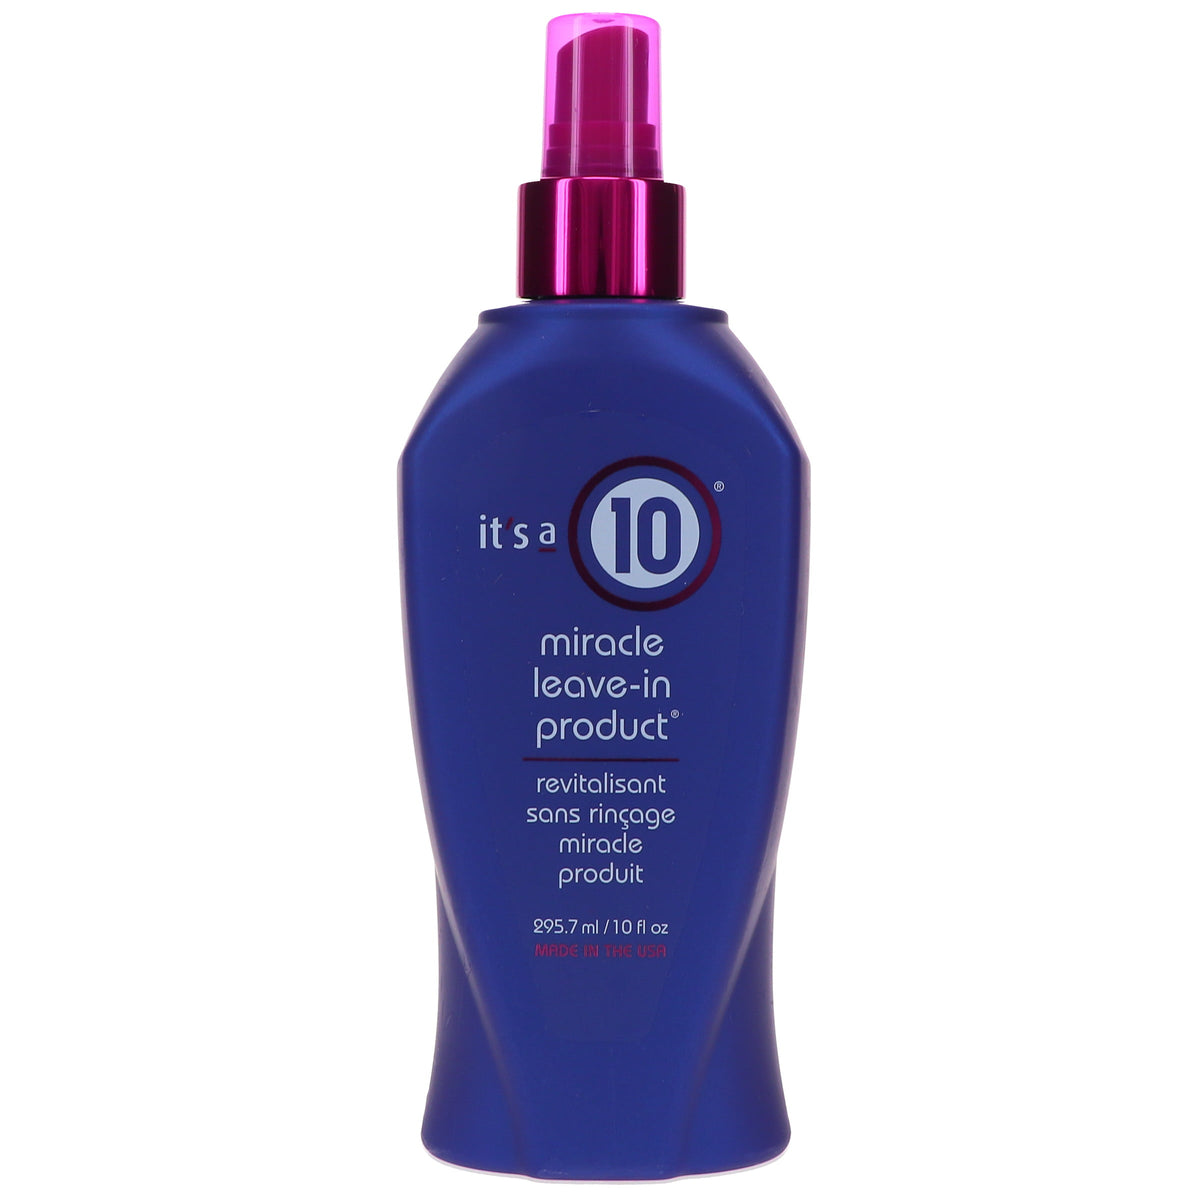 It's A 10 - Miracle Leave-In Product 295.7ml